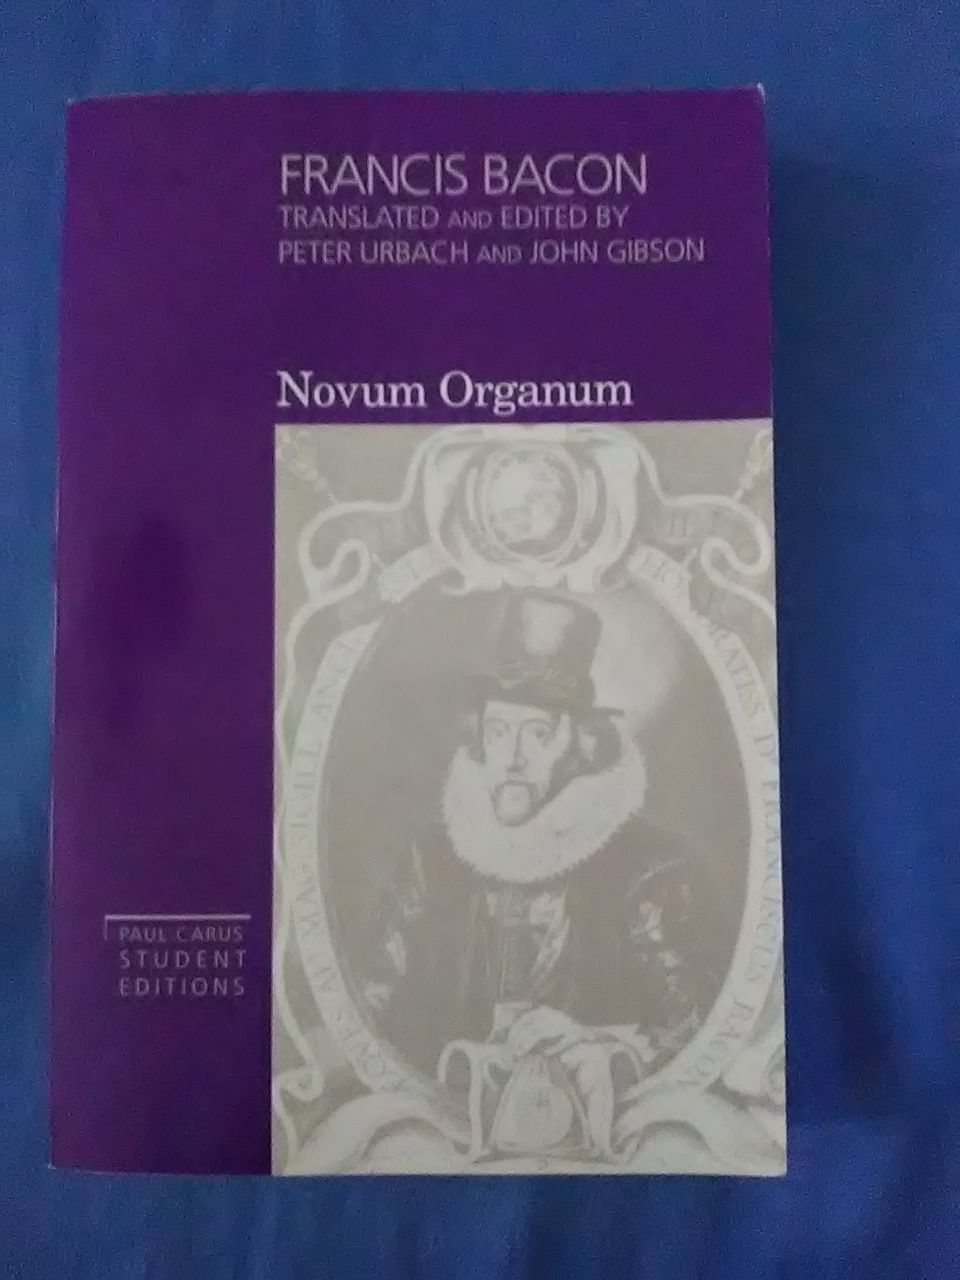 Novum Organum: With Other Parts of the Great Instauration (Paul Carus Student Editions, Vol 3) - Gibson, John, Peter Urbach and Francis. Bacon